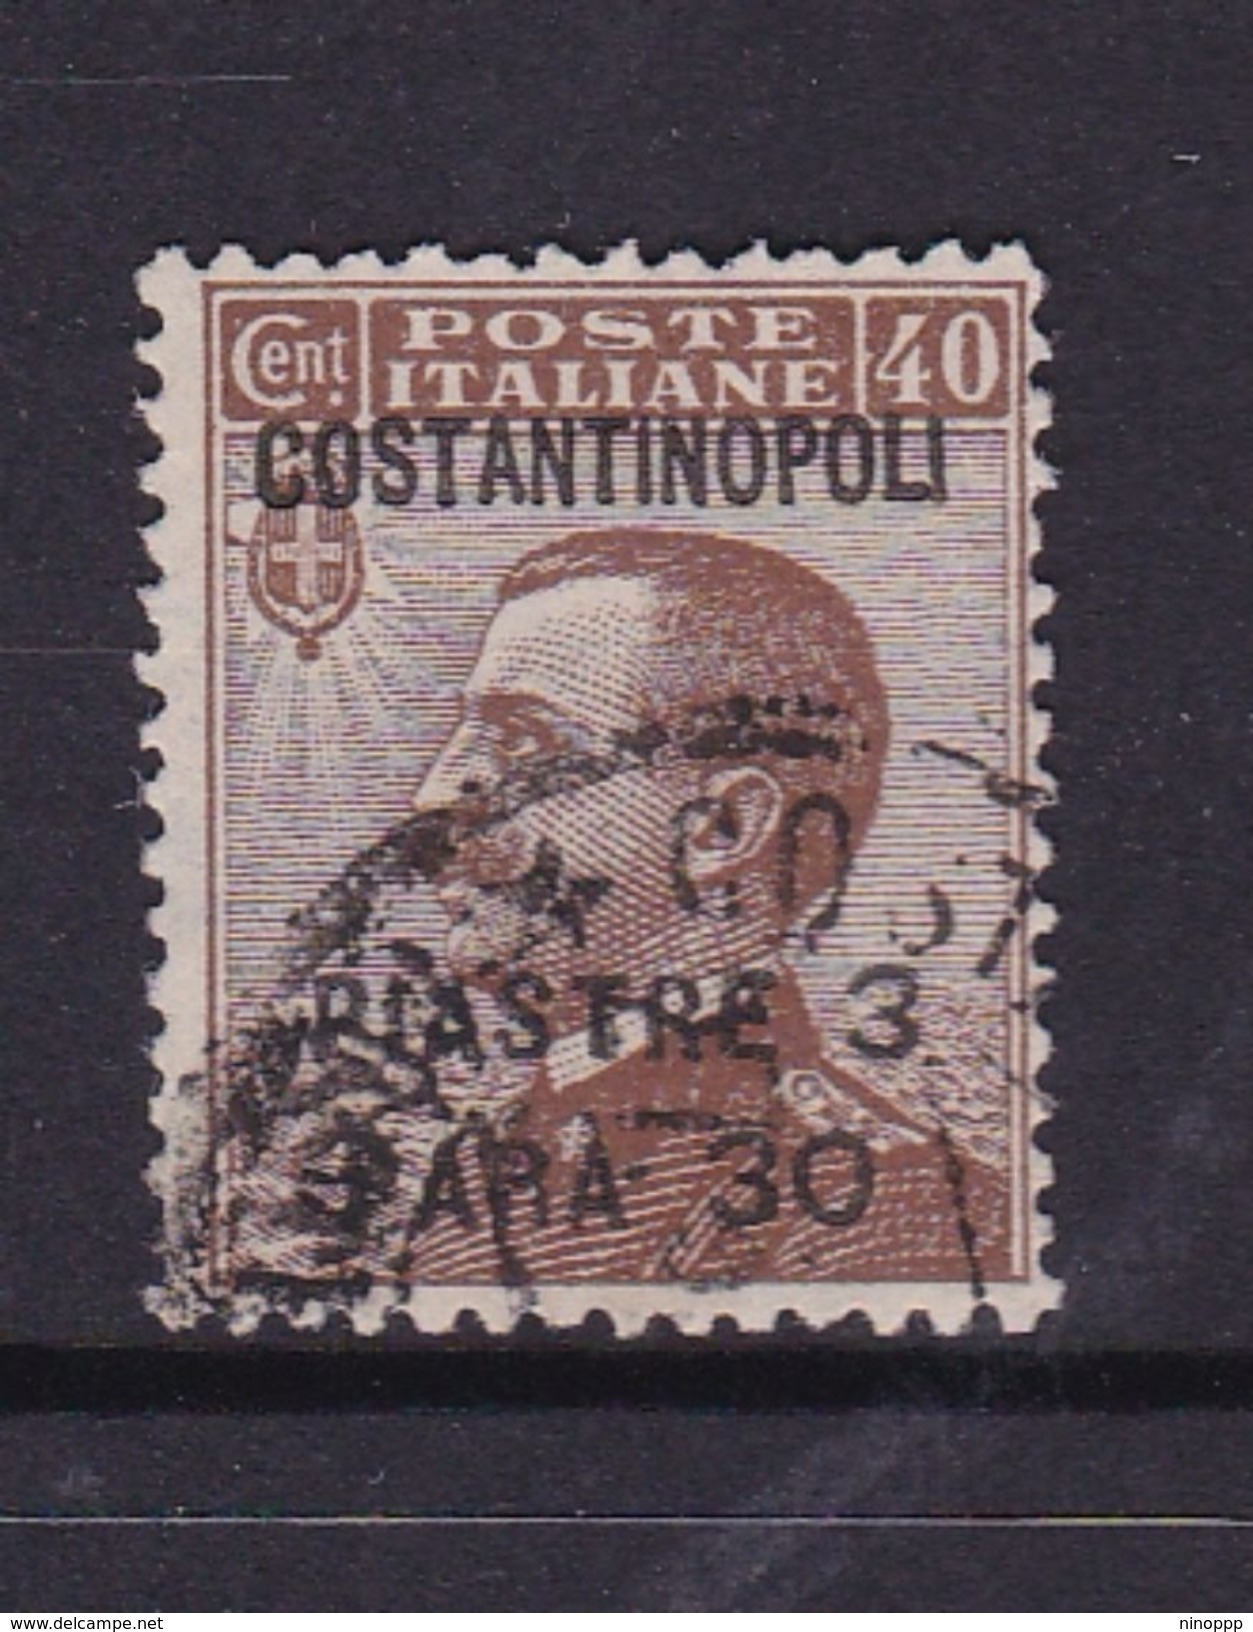 Italy-Italian Offices Abroad-European And Asia Offices-Constantinople S78 1923 3.30 Piastre On 40c Brown Red Used - European And Asian Offices